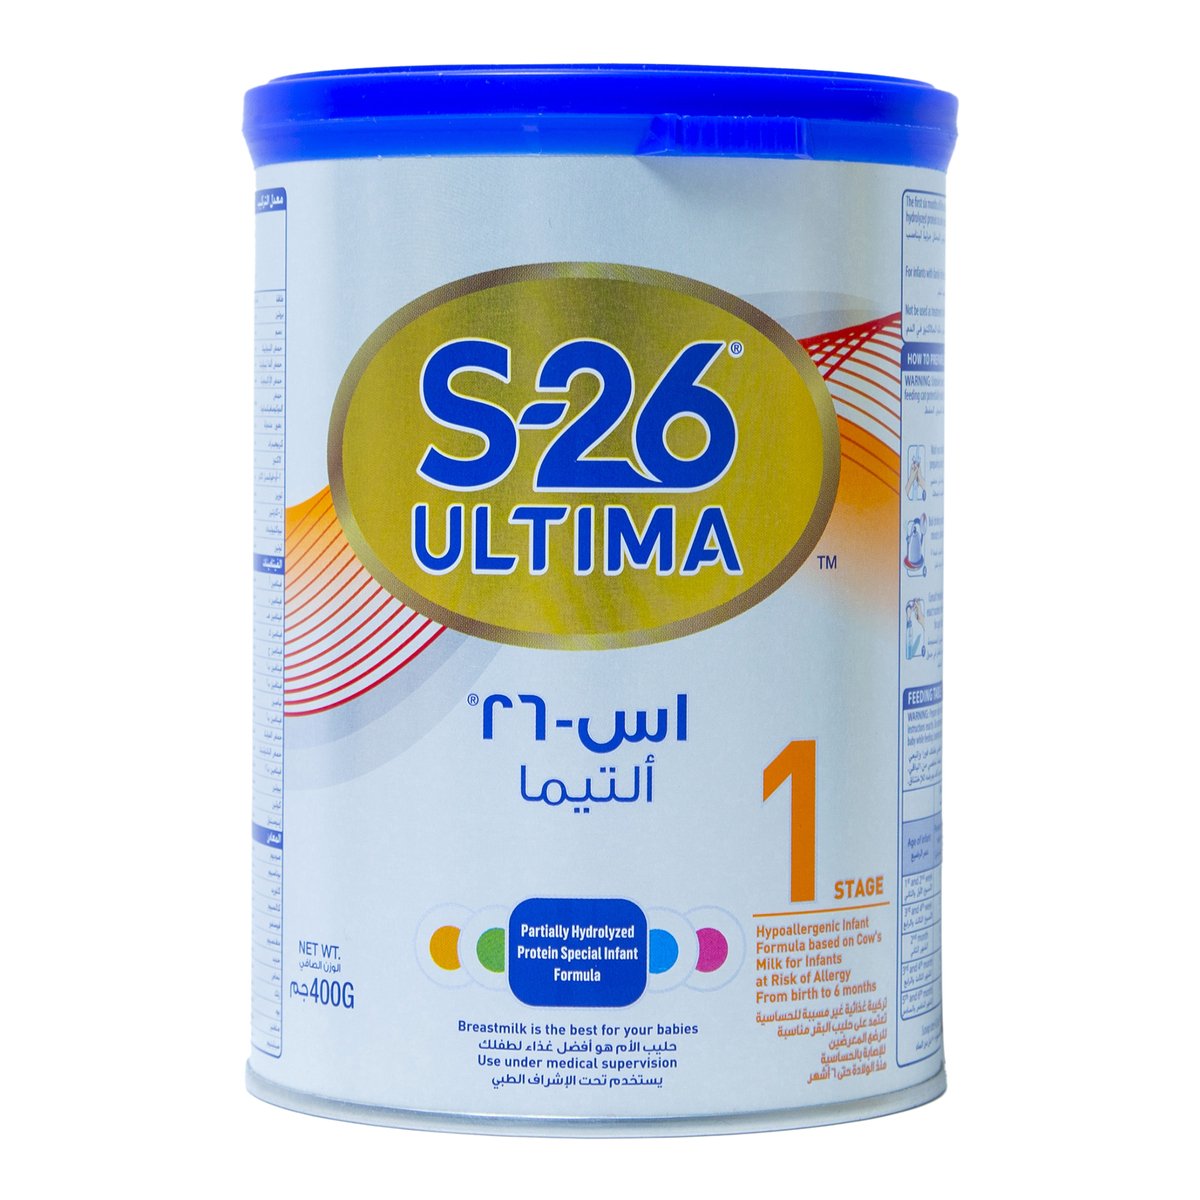 Nestle S26 Ultima Stage 1 Partially Hydrolyzed Protein Special Infant Formula From Birth to 6 Months 400 g